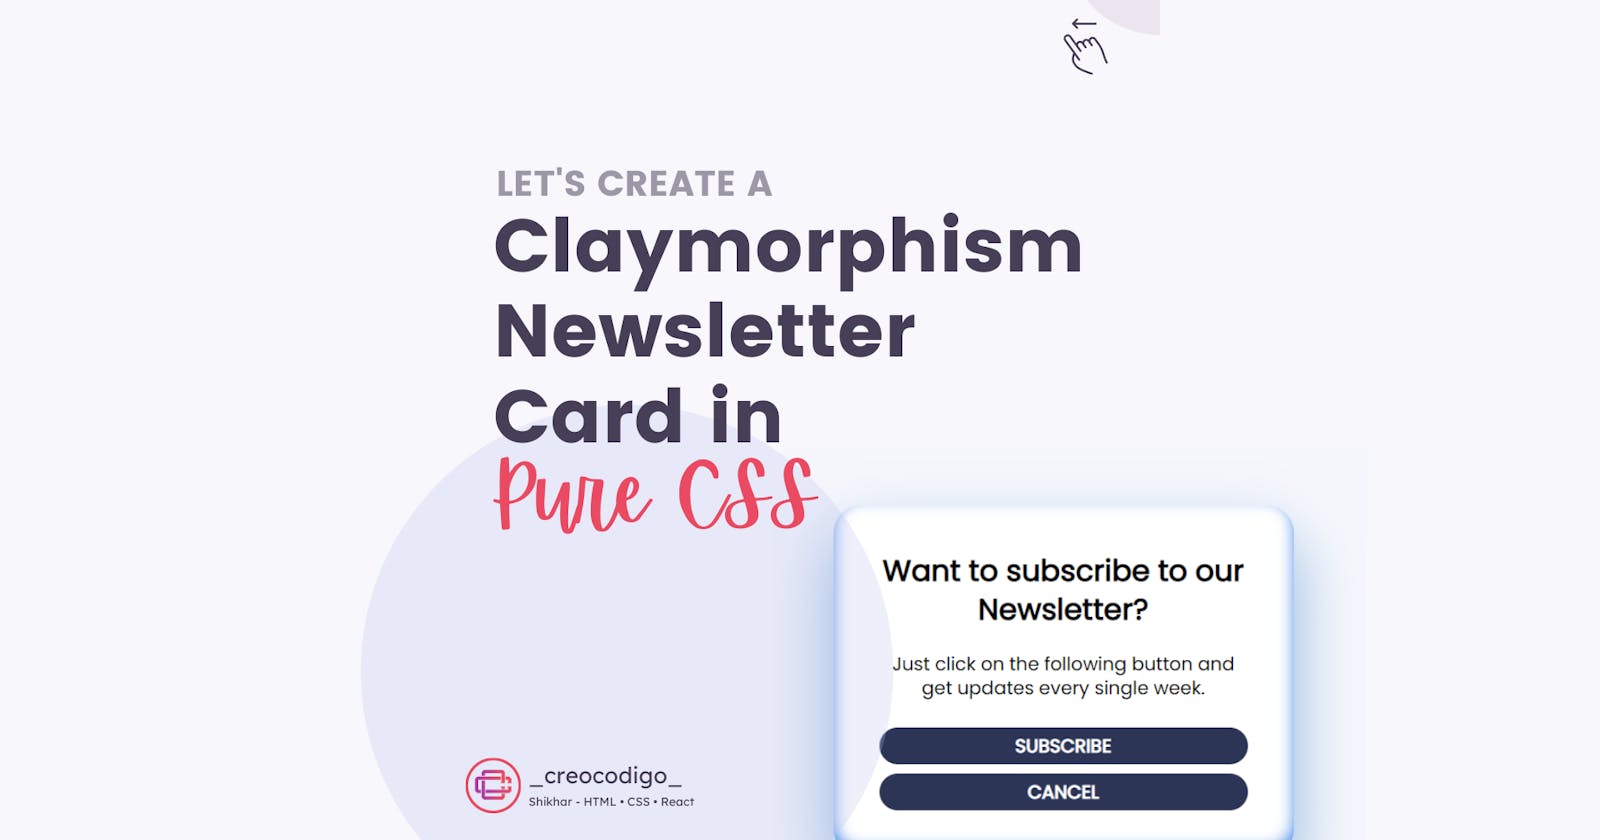 Claymorphism Newsletter Card using Pure CSS